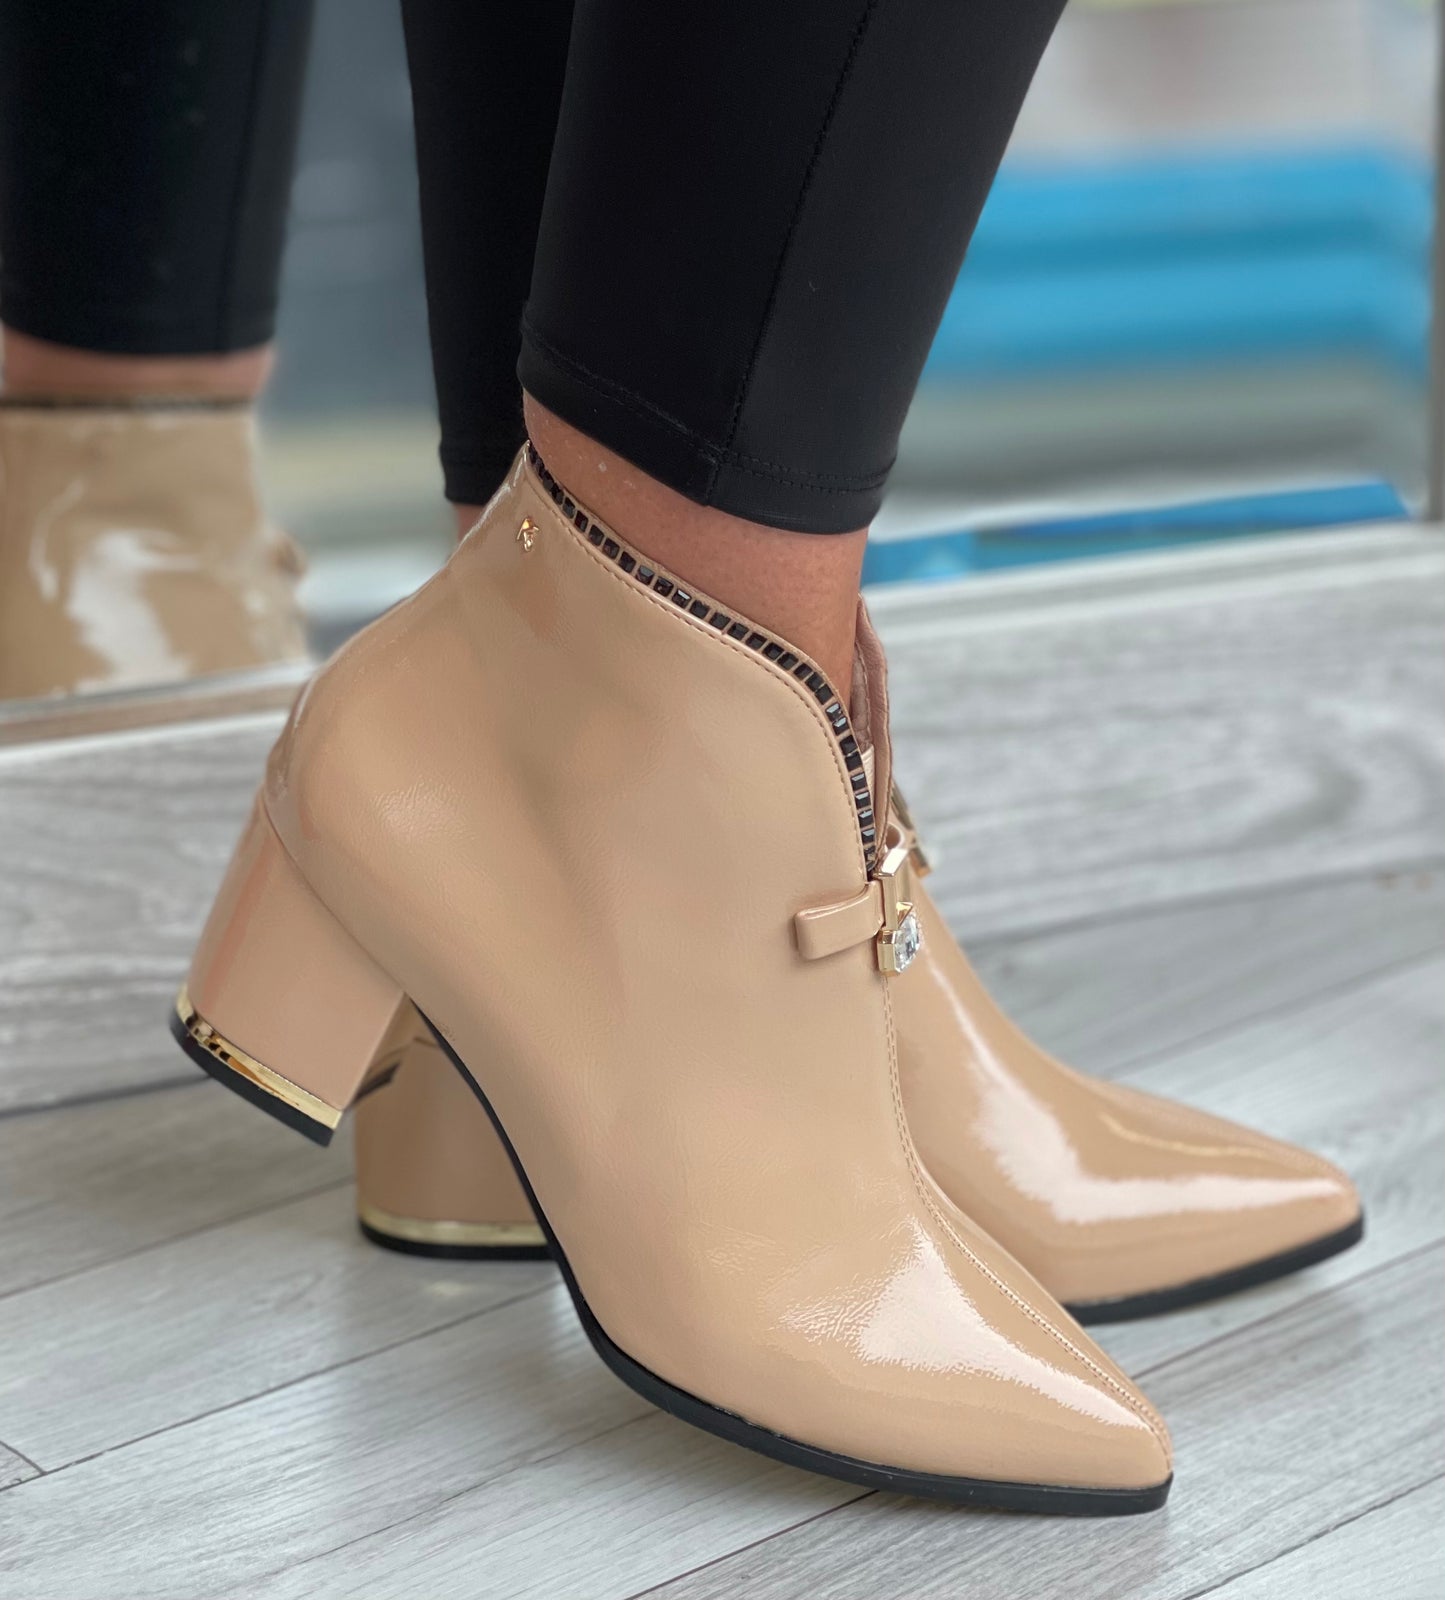 Kate Appleby - 'Alness' Make Up Patent Boot